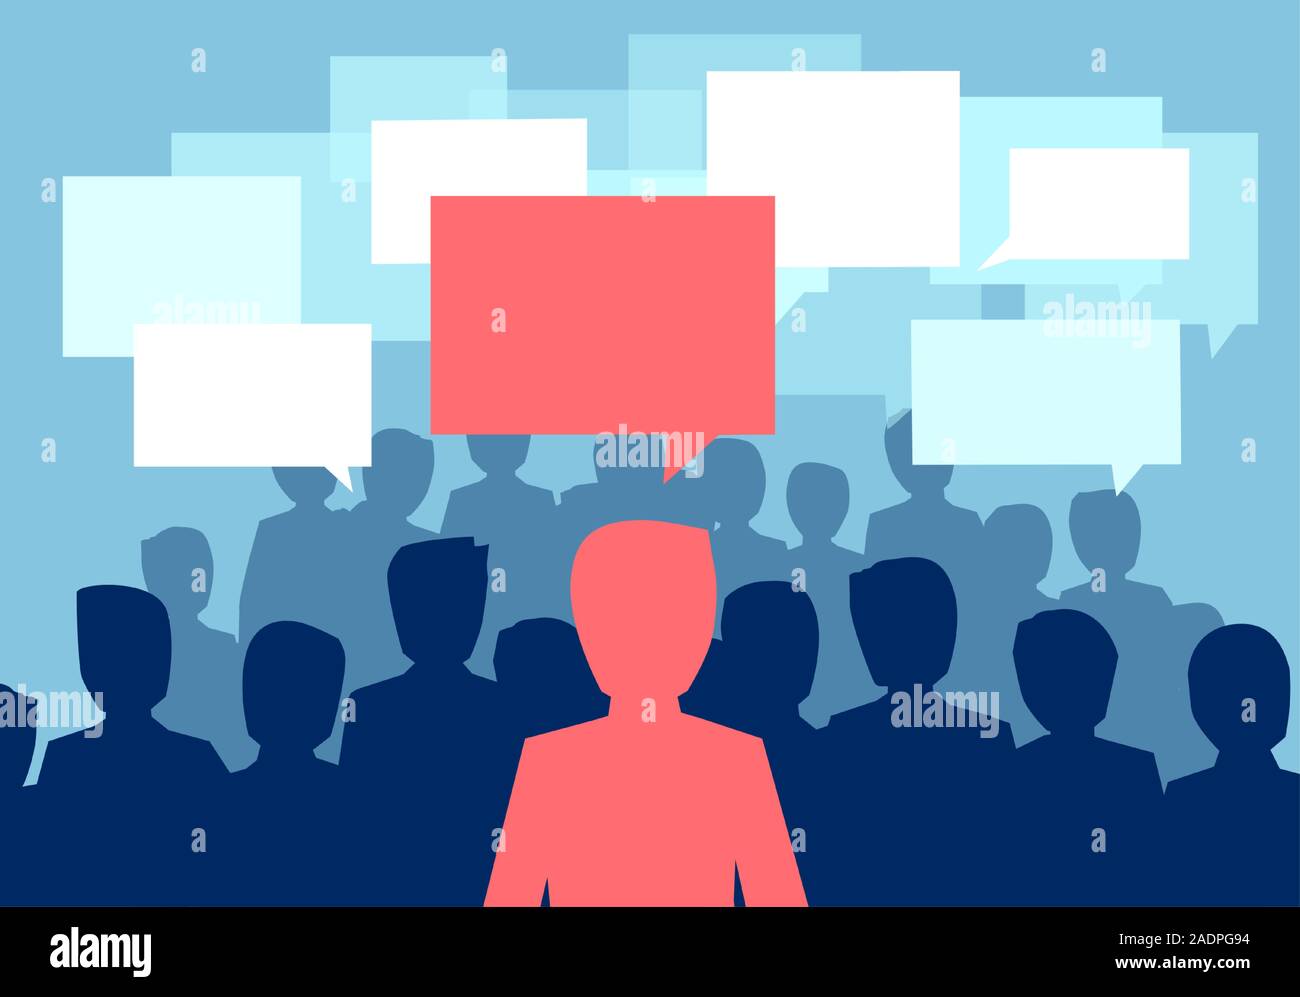 Community communication concept. Vector of a people crowd communicating with one person having a different opinion Stock Vector